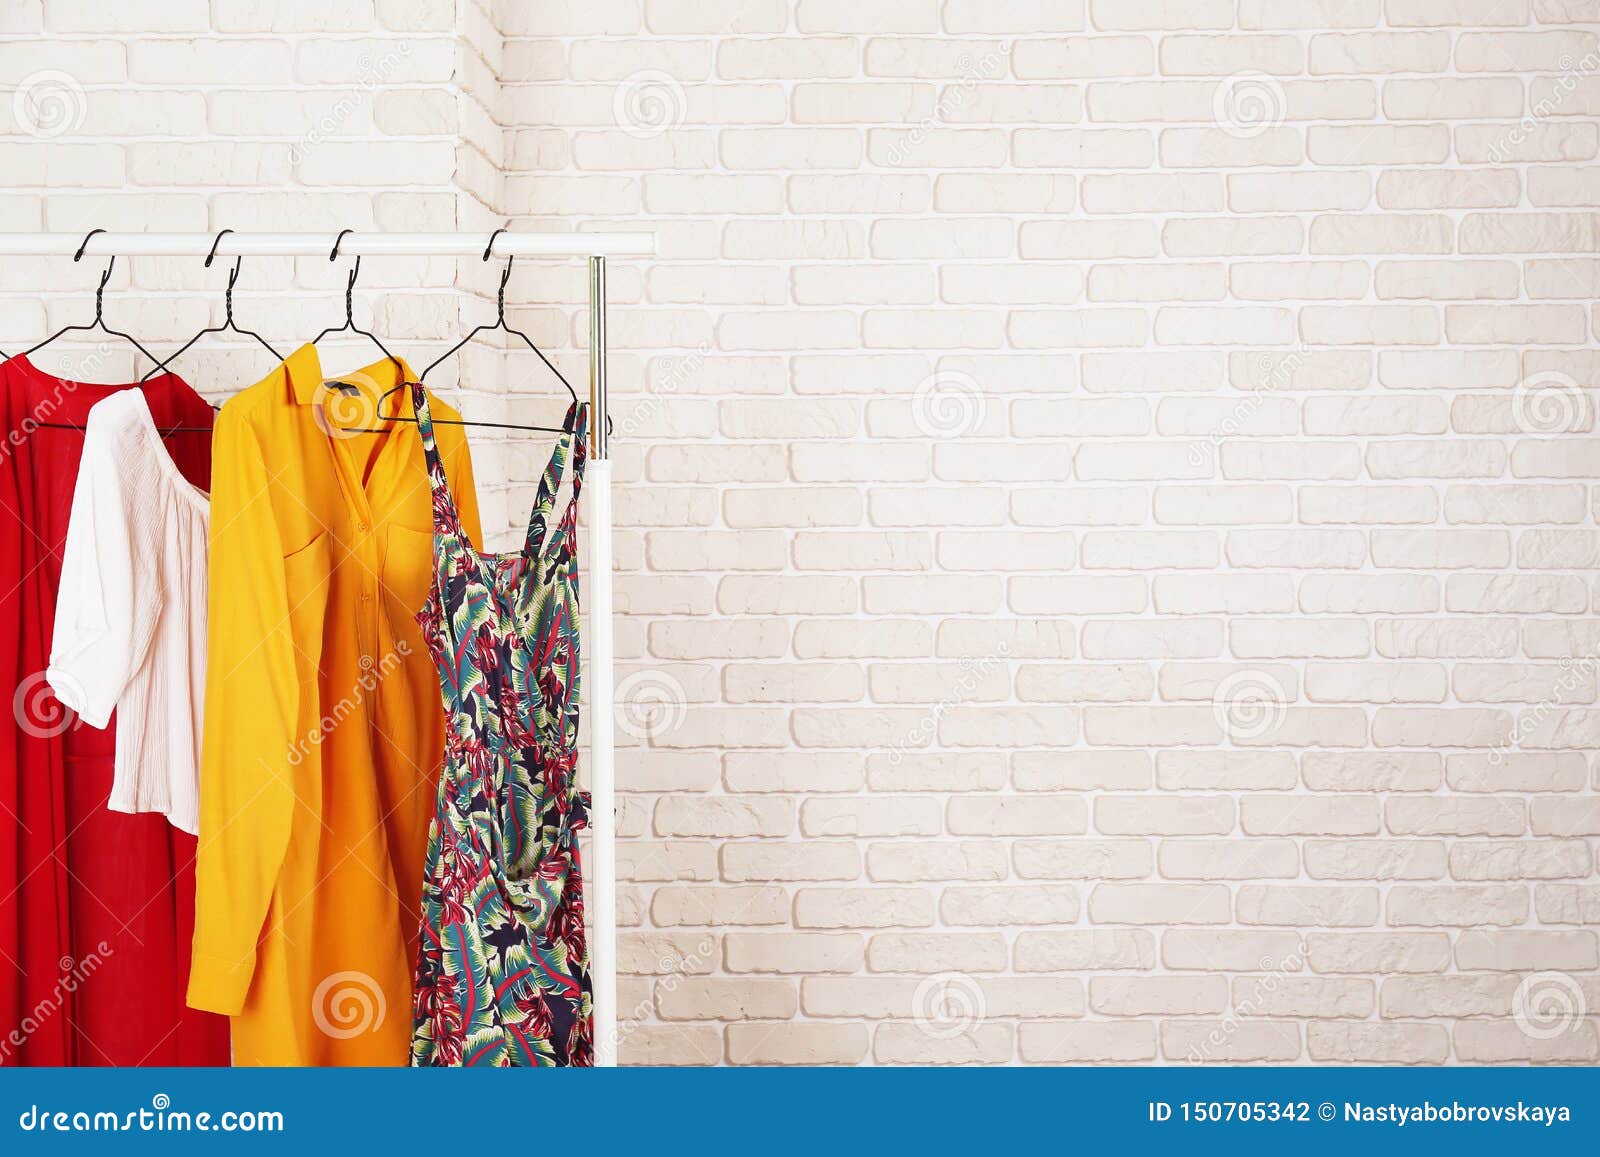 casual clothing boutique store rack with multiple dresses.